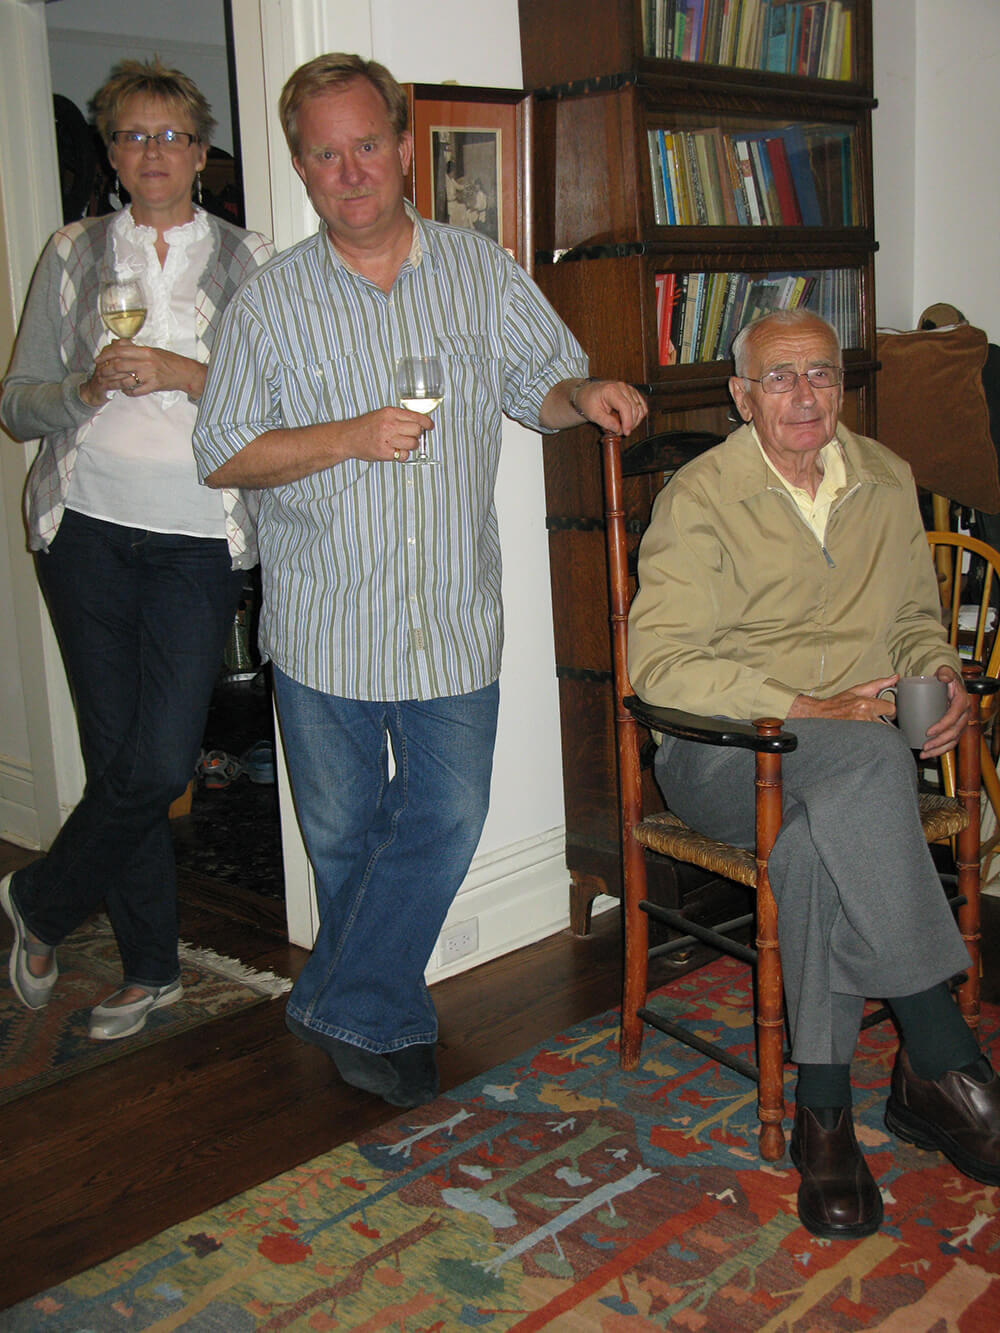 In this June 2012 photograph, we see Sandra, Tom, and Arie gathered in a study room. Arie is seated on a chair positioned in the bottom left of the picture. Standing in the middle is Tom, with his left arm casually resting on the chair that Arie occupies, while holding a wine glass in his right hand. Positioned behind Tom is Sandra, also holding a wine glass.